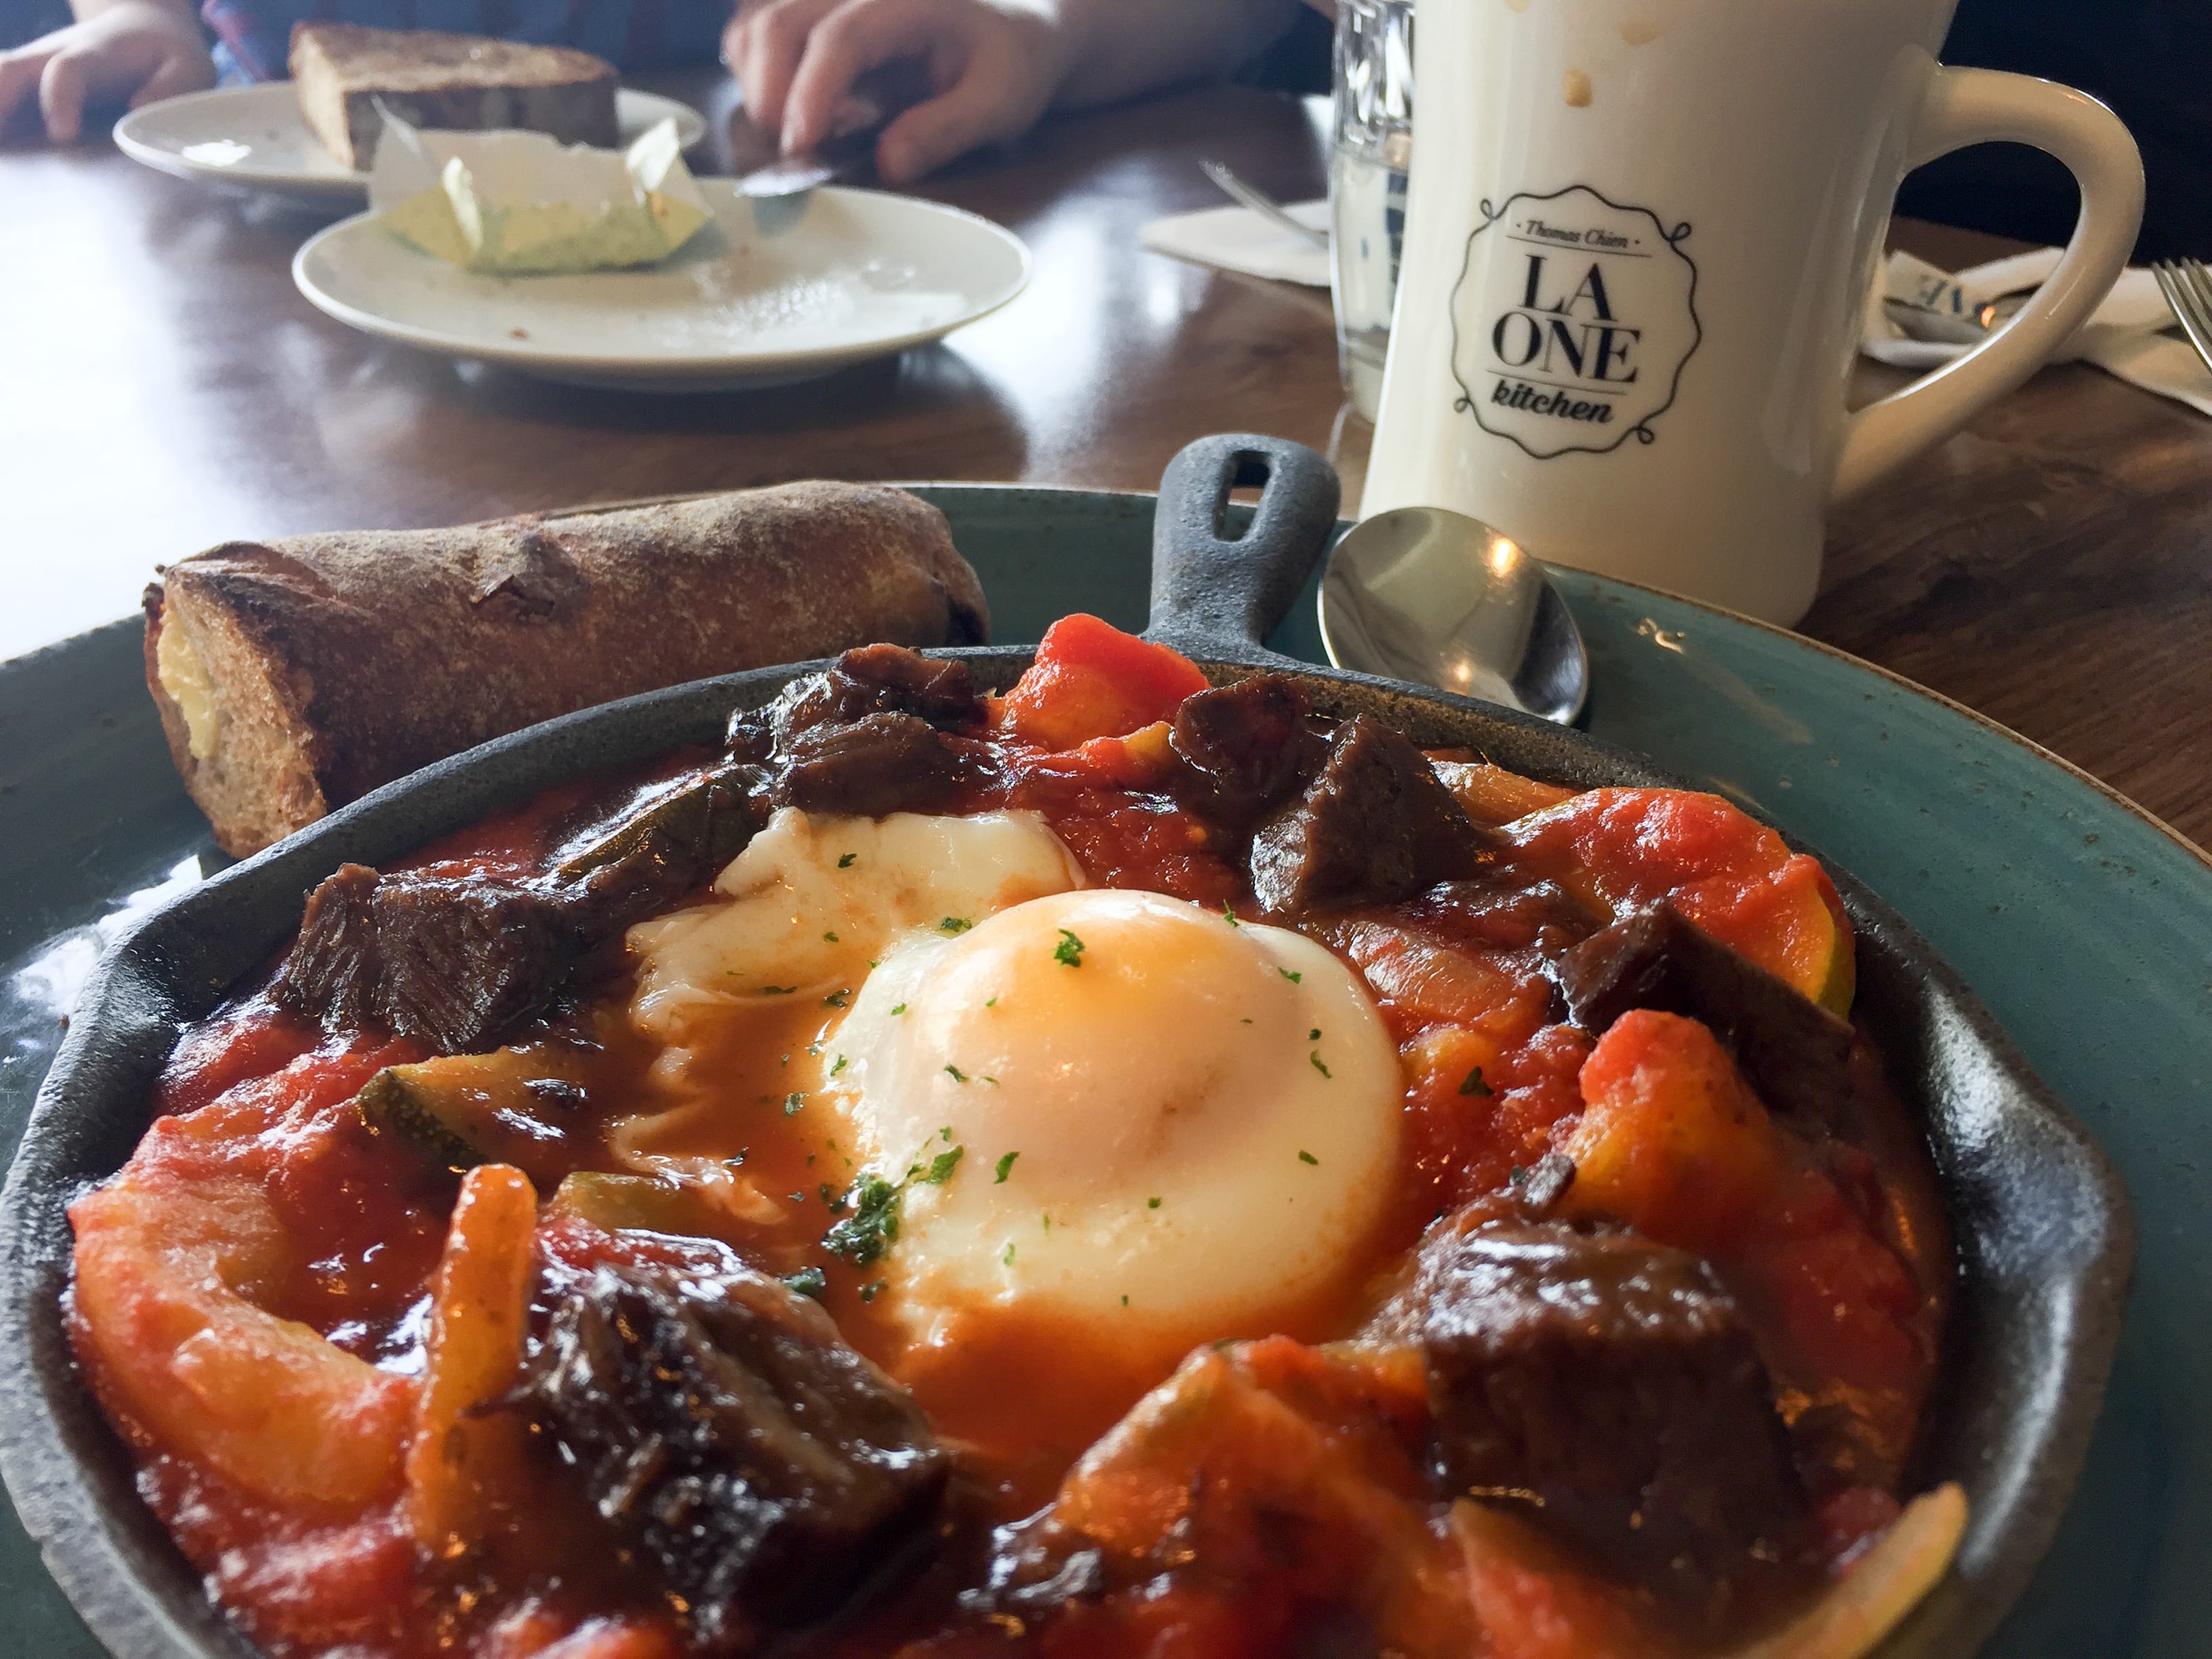 Braised Beef Cheeks with Egg, Vegetables and Bread